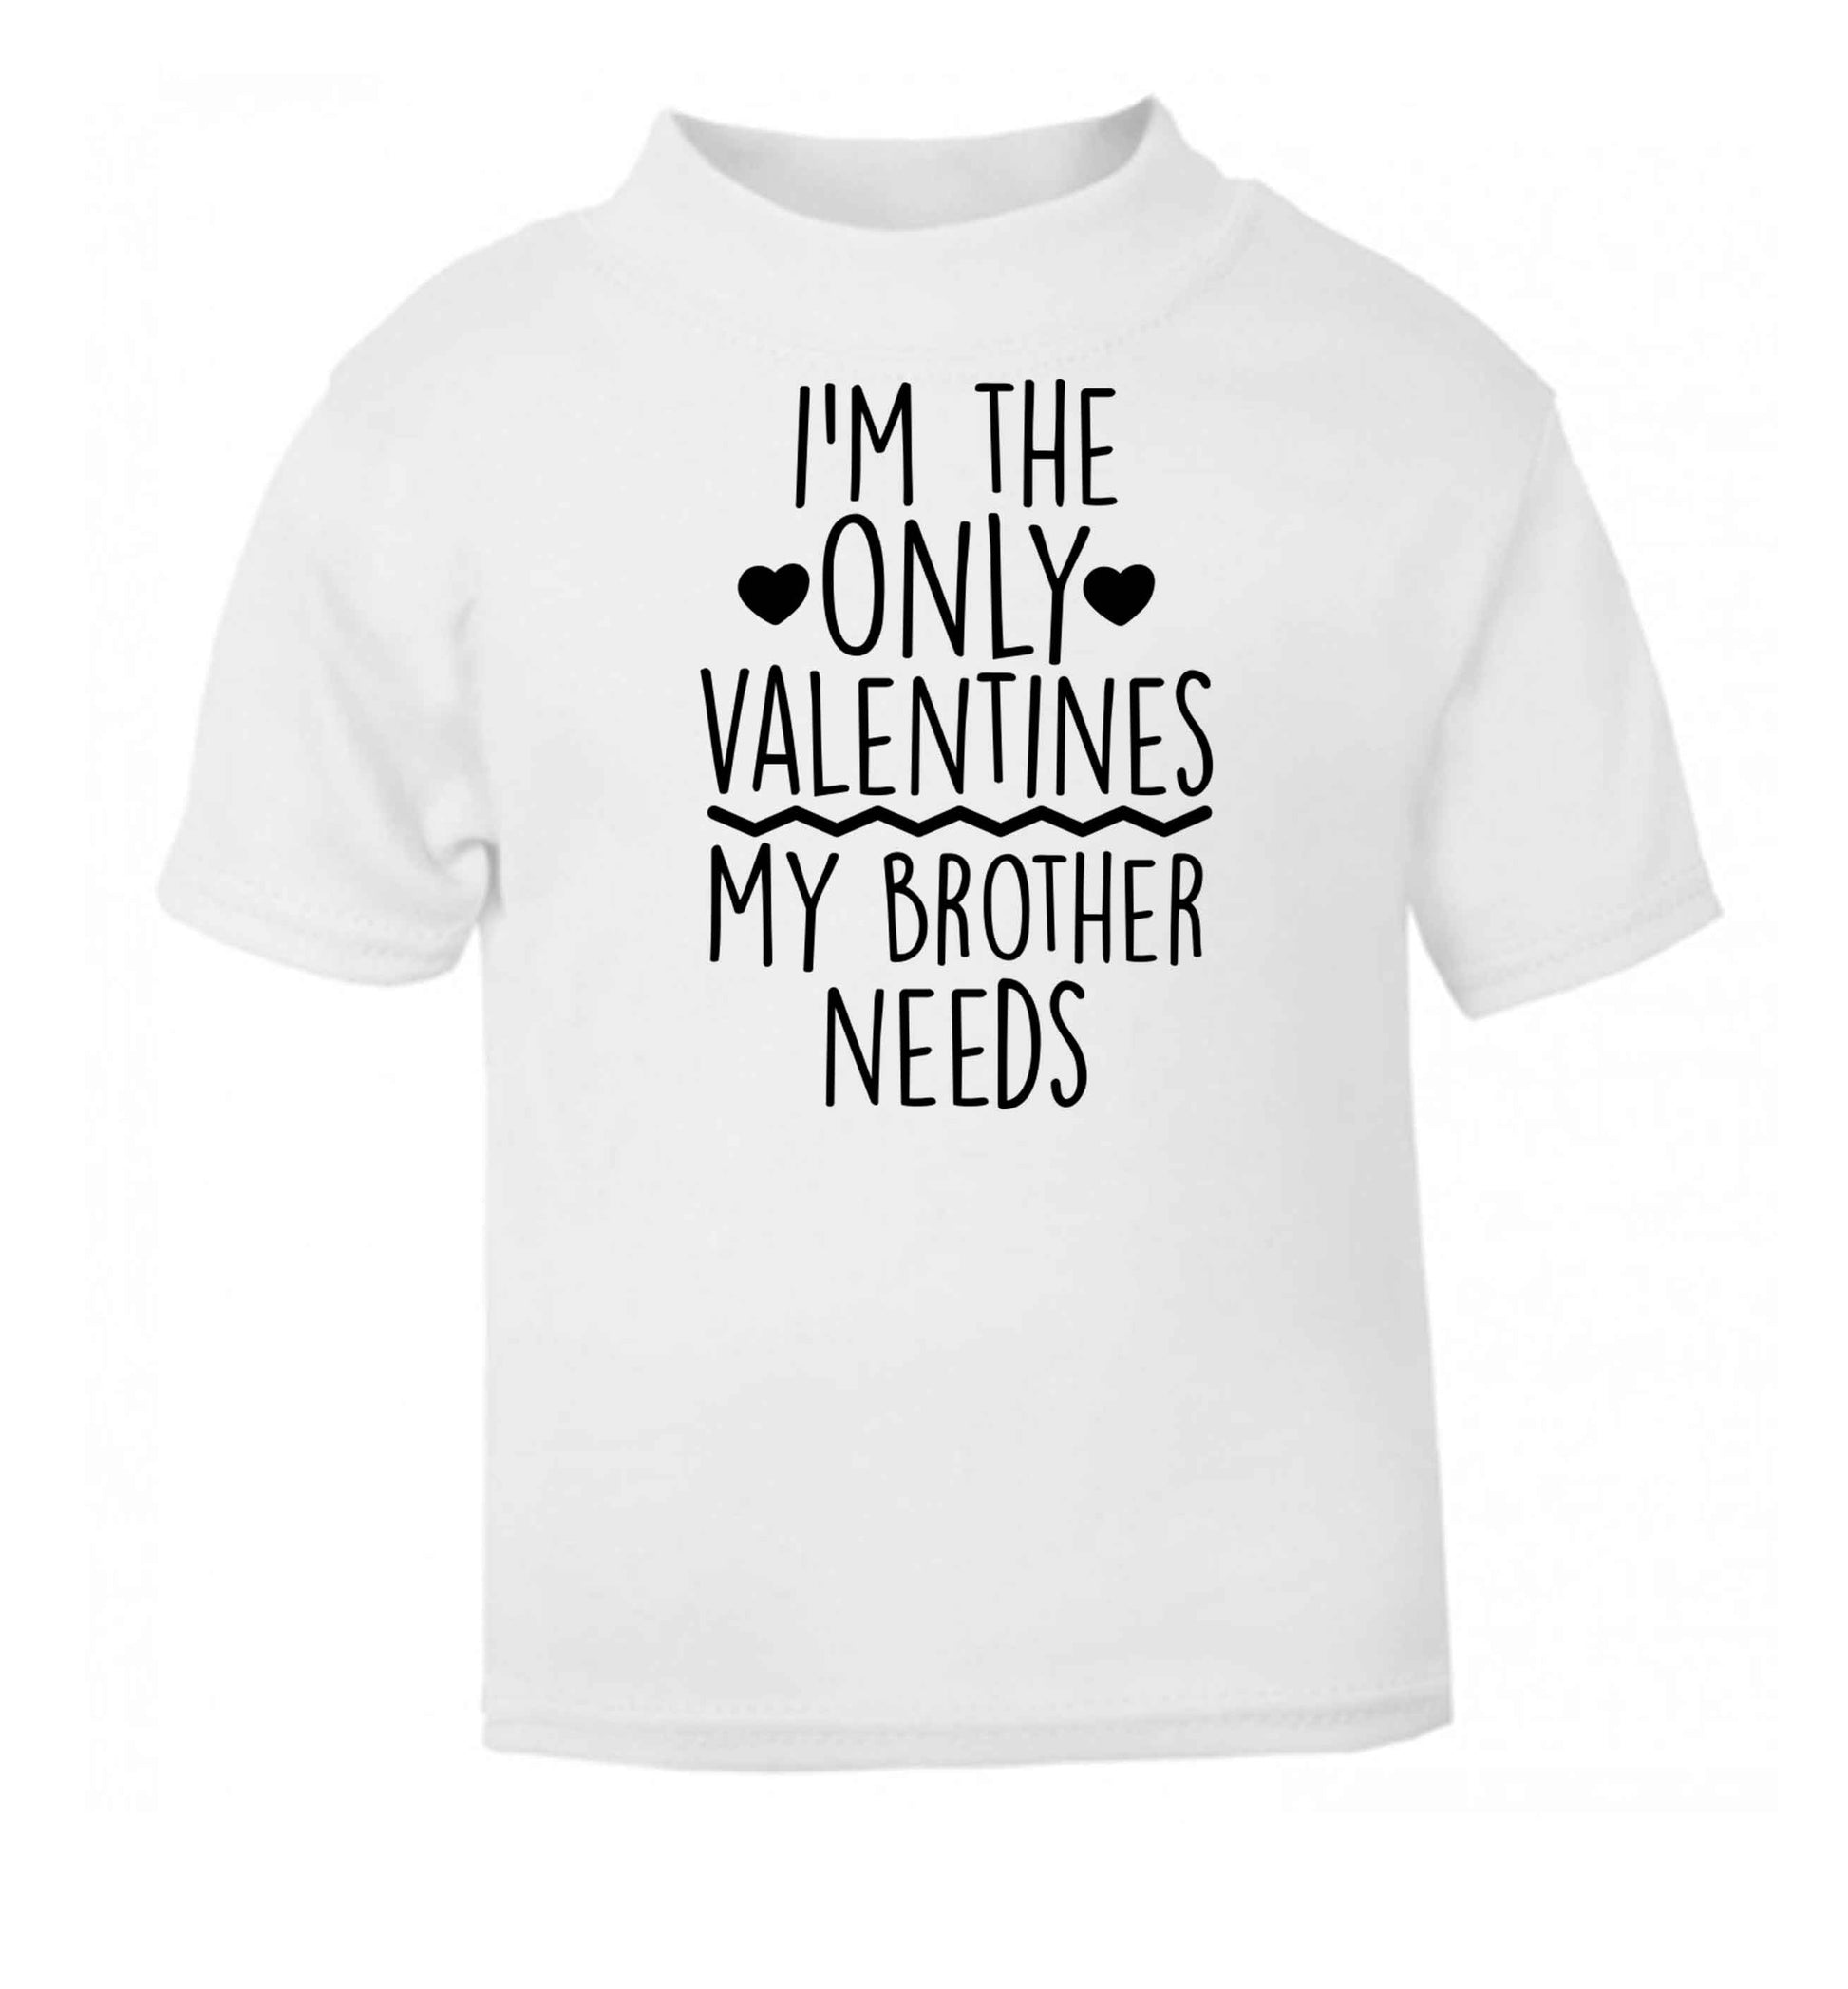 I'm the only valentines my brother needs white baby toddler Tshirt 2 Years